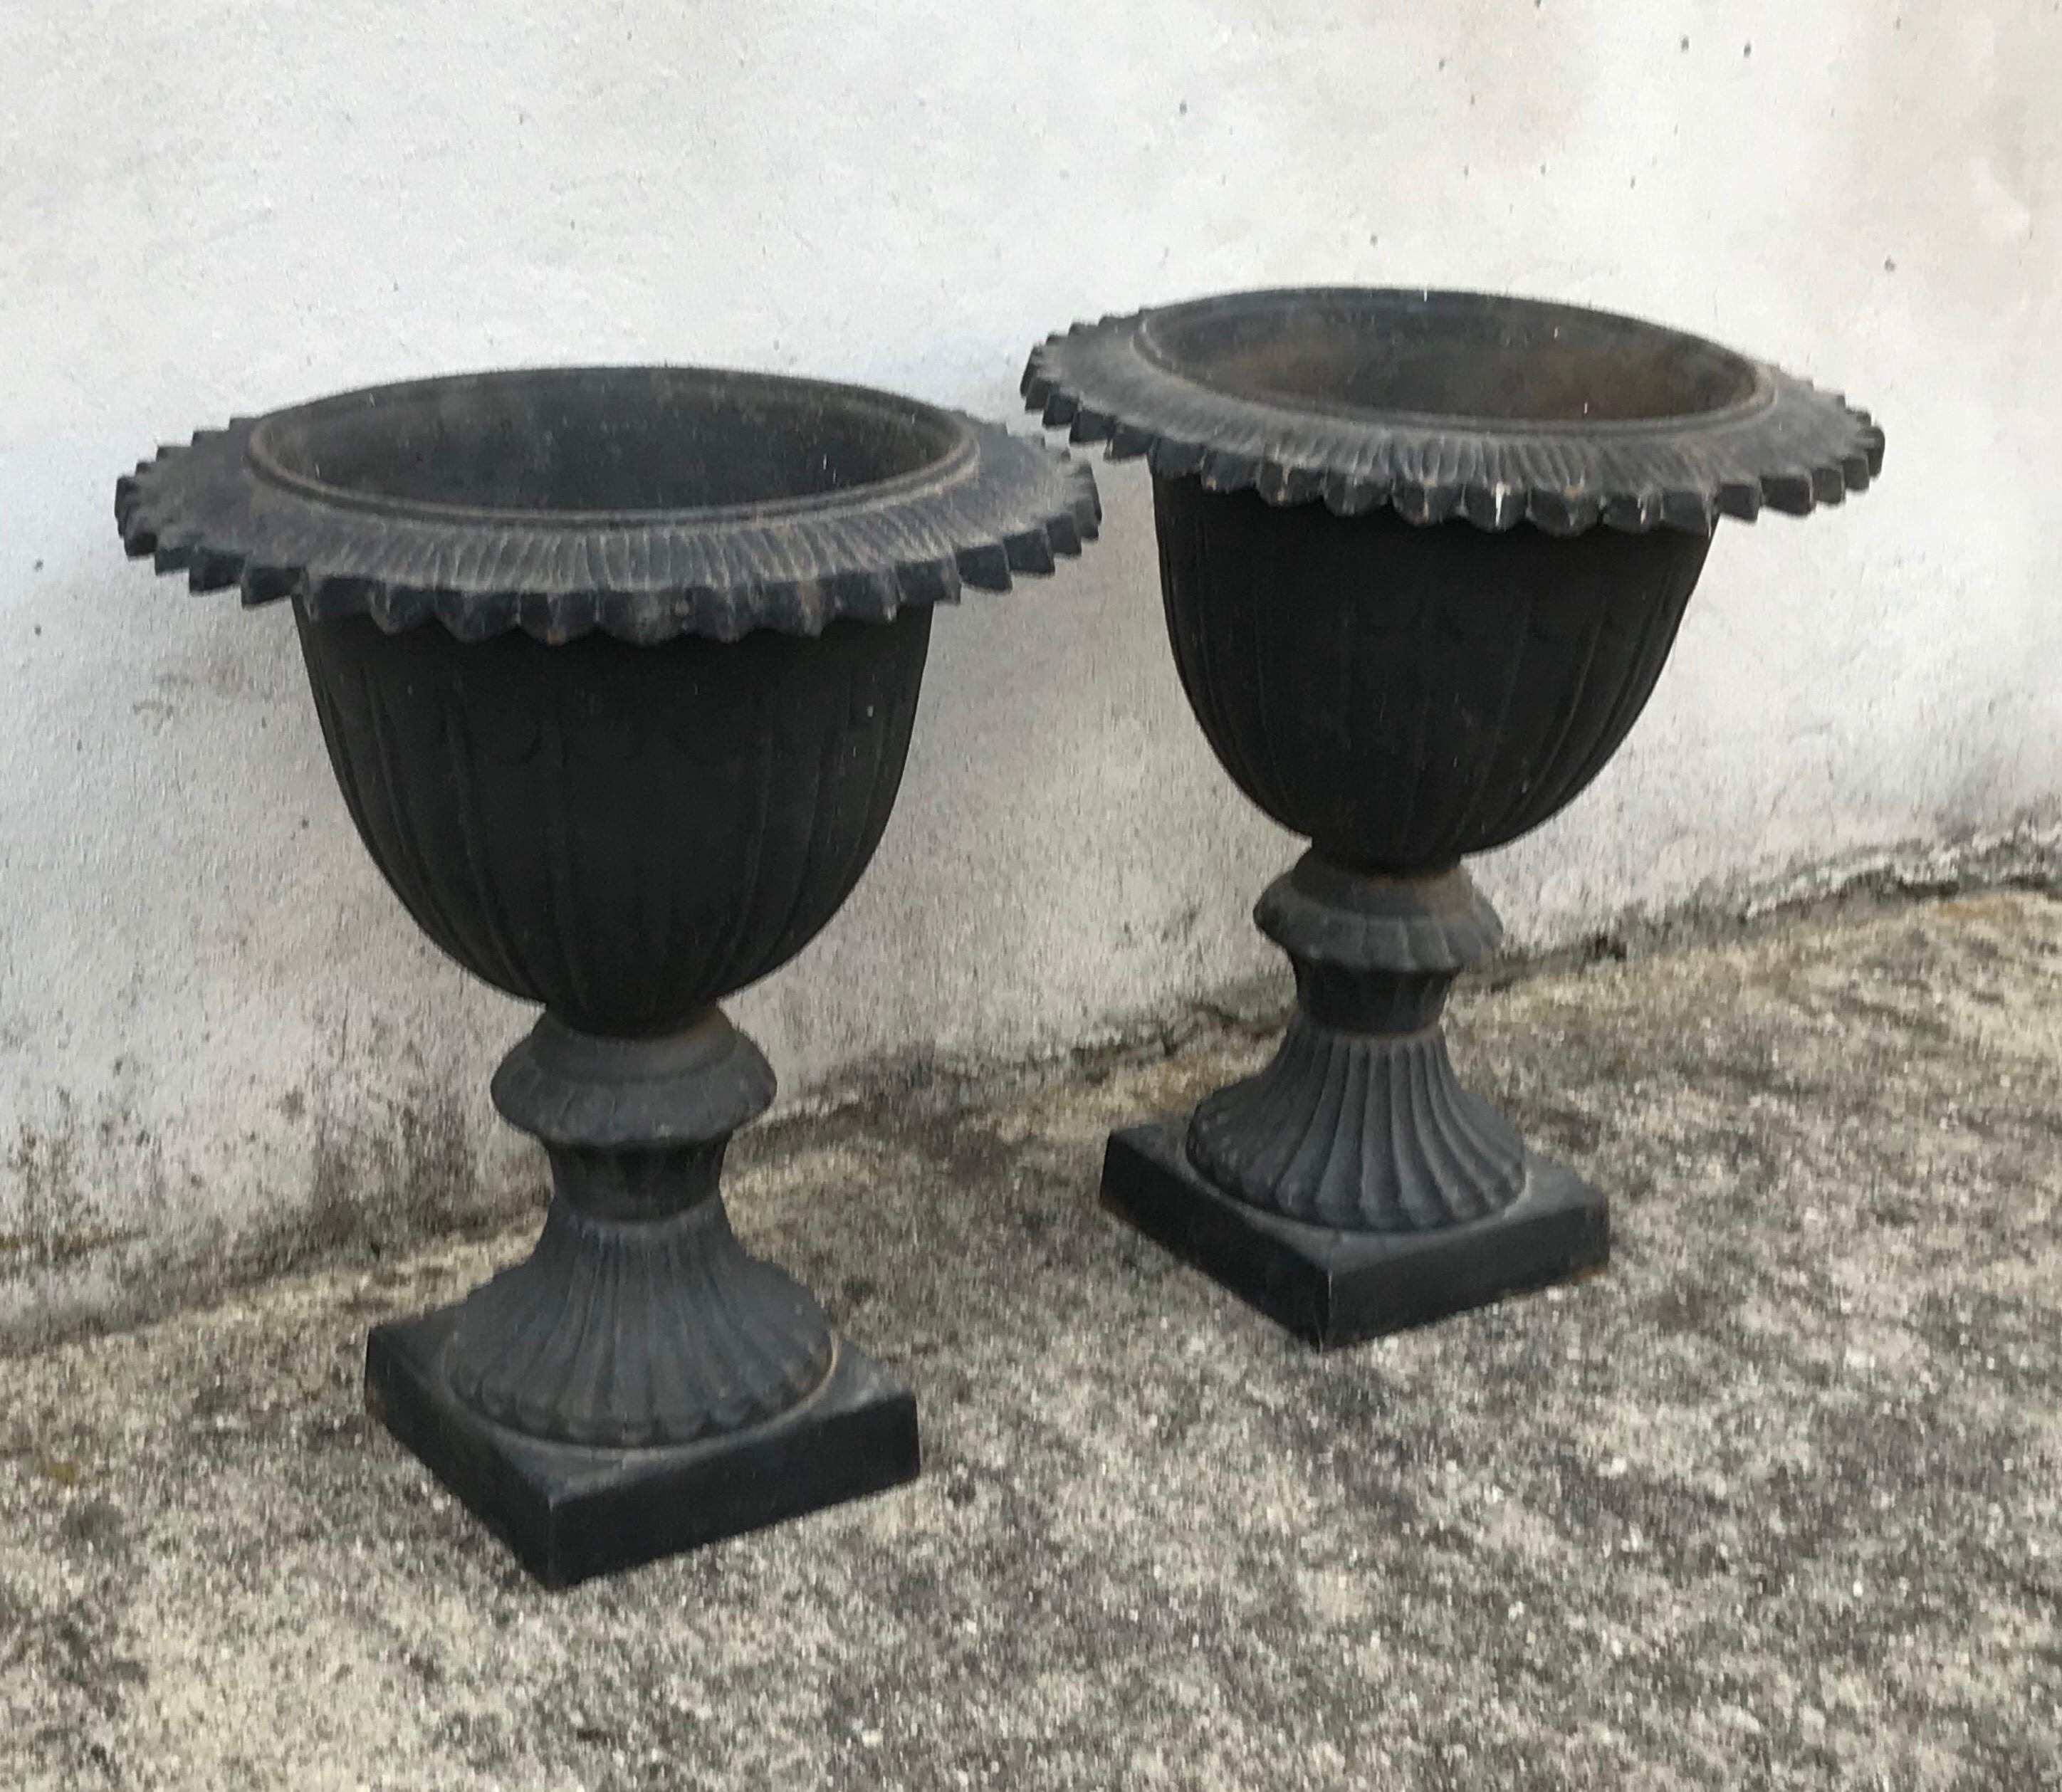 Very nice pair of black cast iron urns, early 20th century.